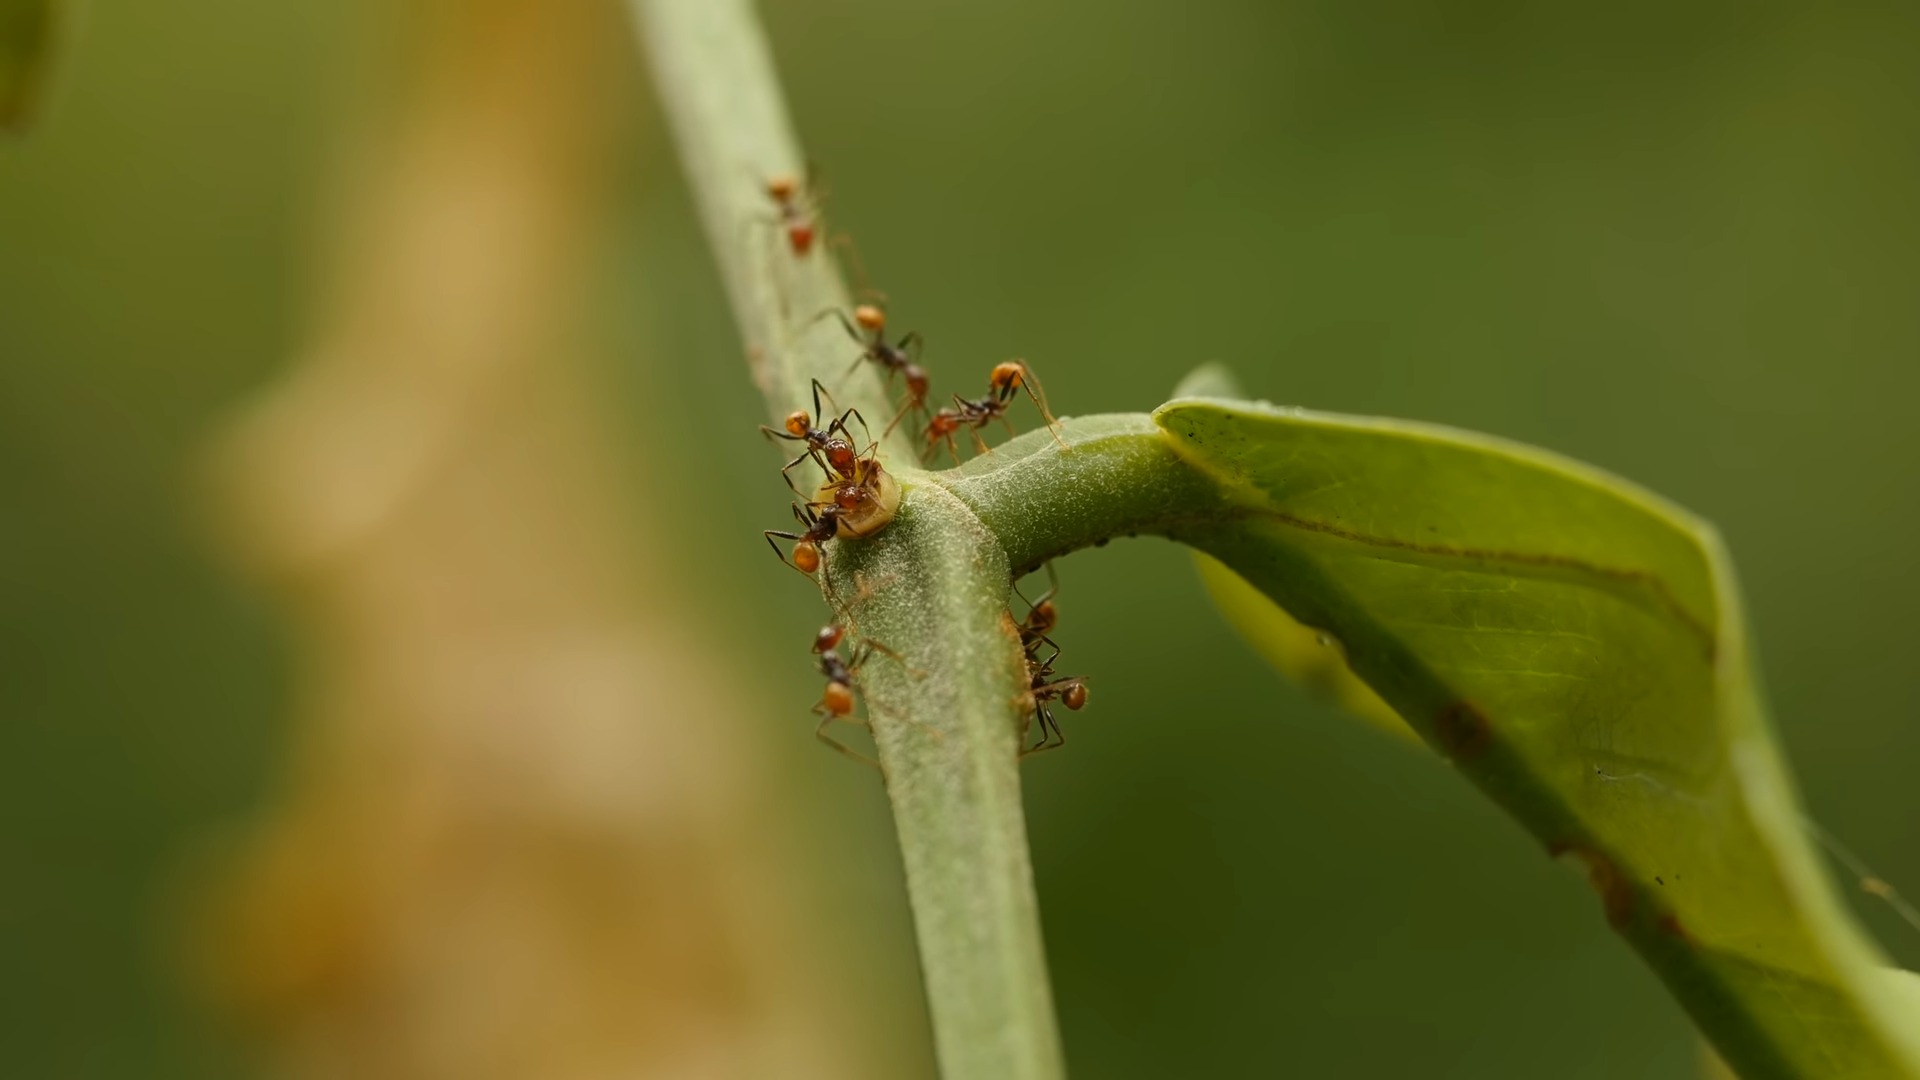 Ants on Grass